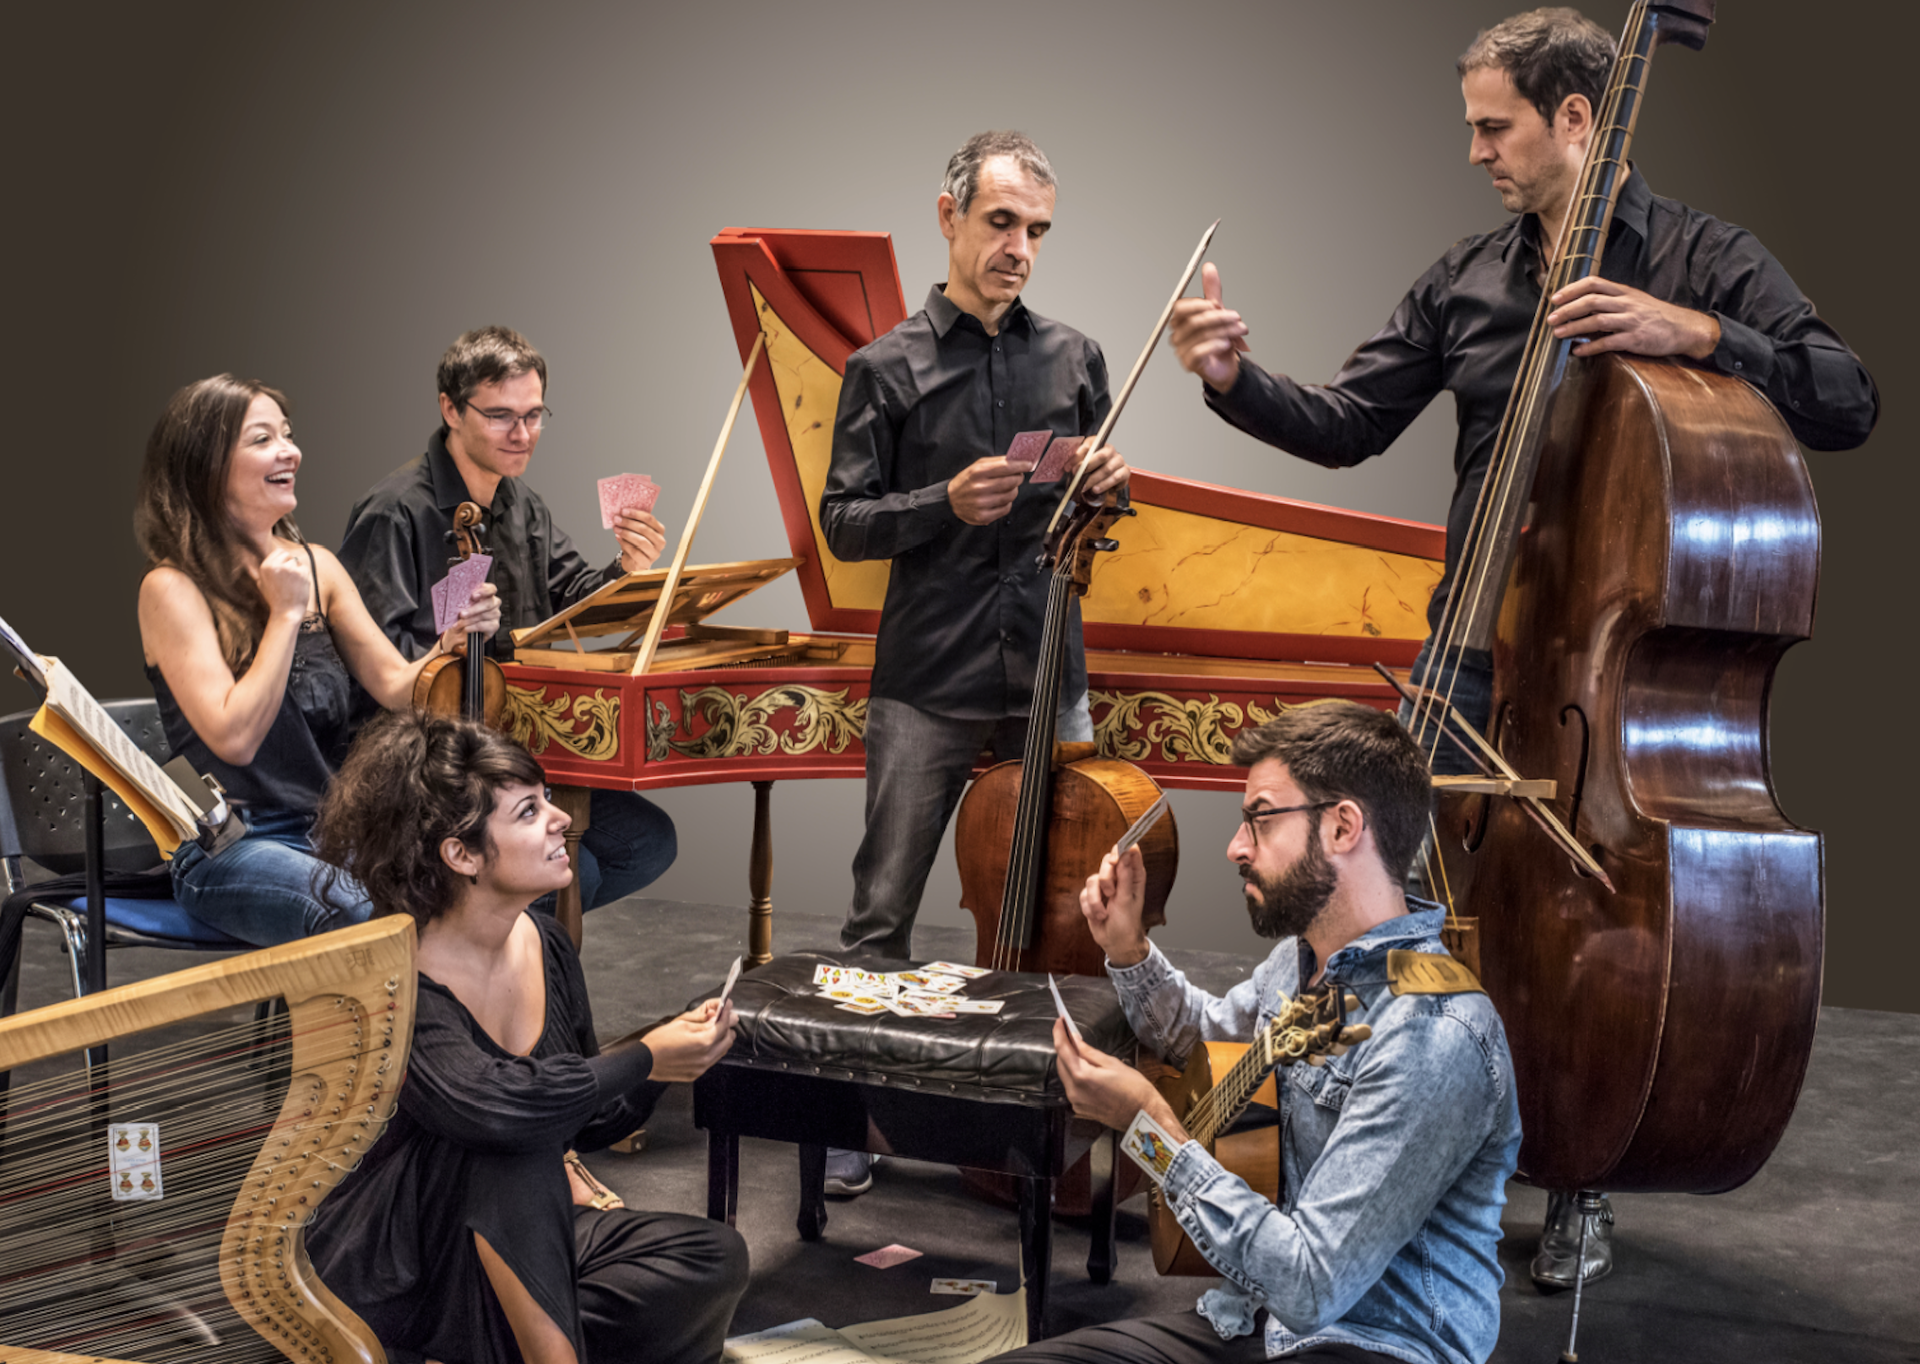 The 11th edition of the Pyrenees Early Music Festival has the Balearic Islands as guest territory